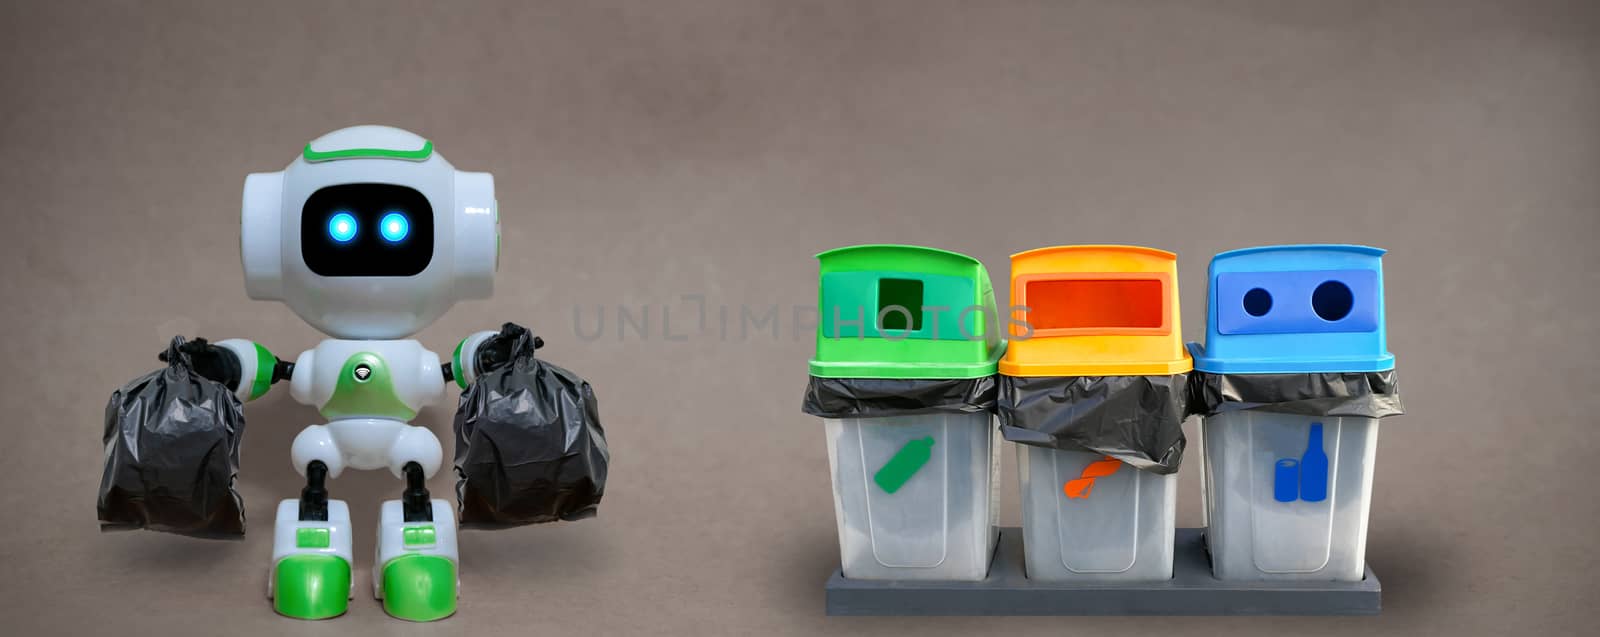 Robot hold garbage bags technology recycle environment on a gray background by sompongtom